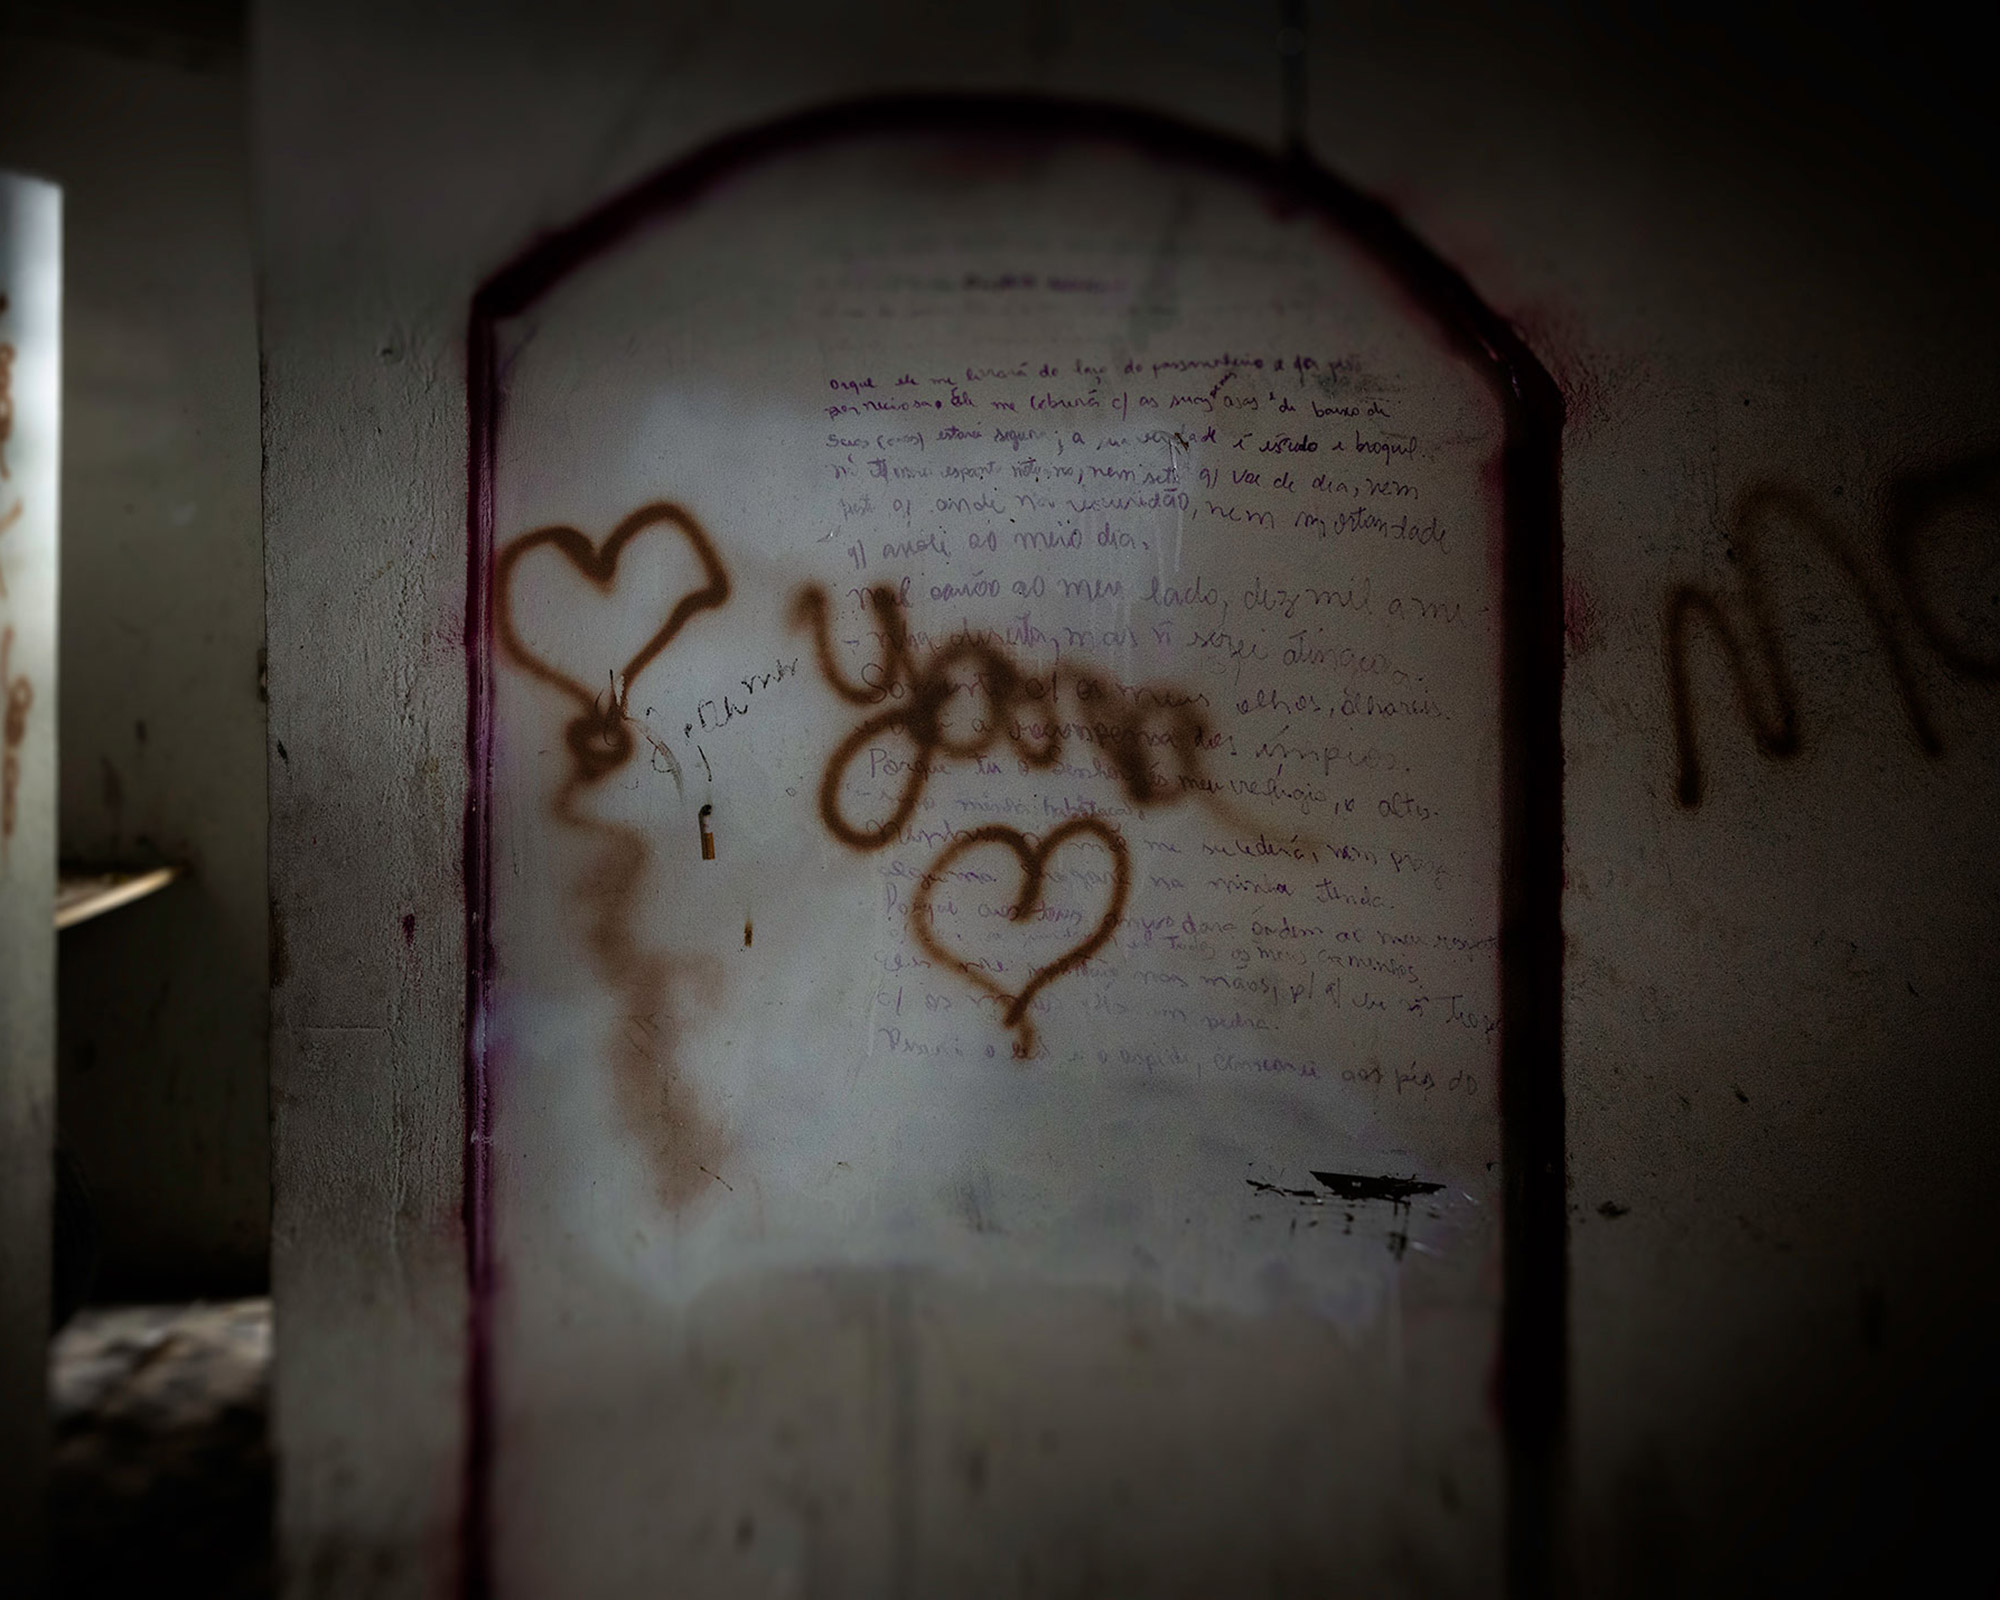 Love letters are written on the walls.